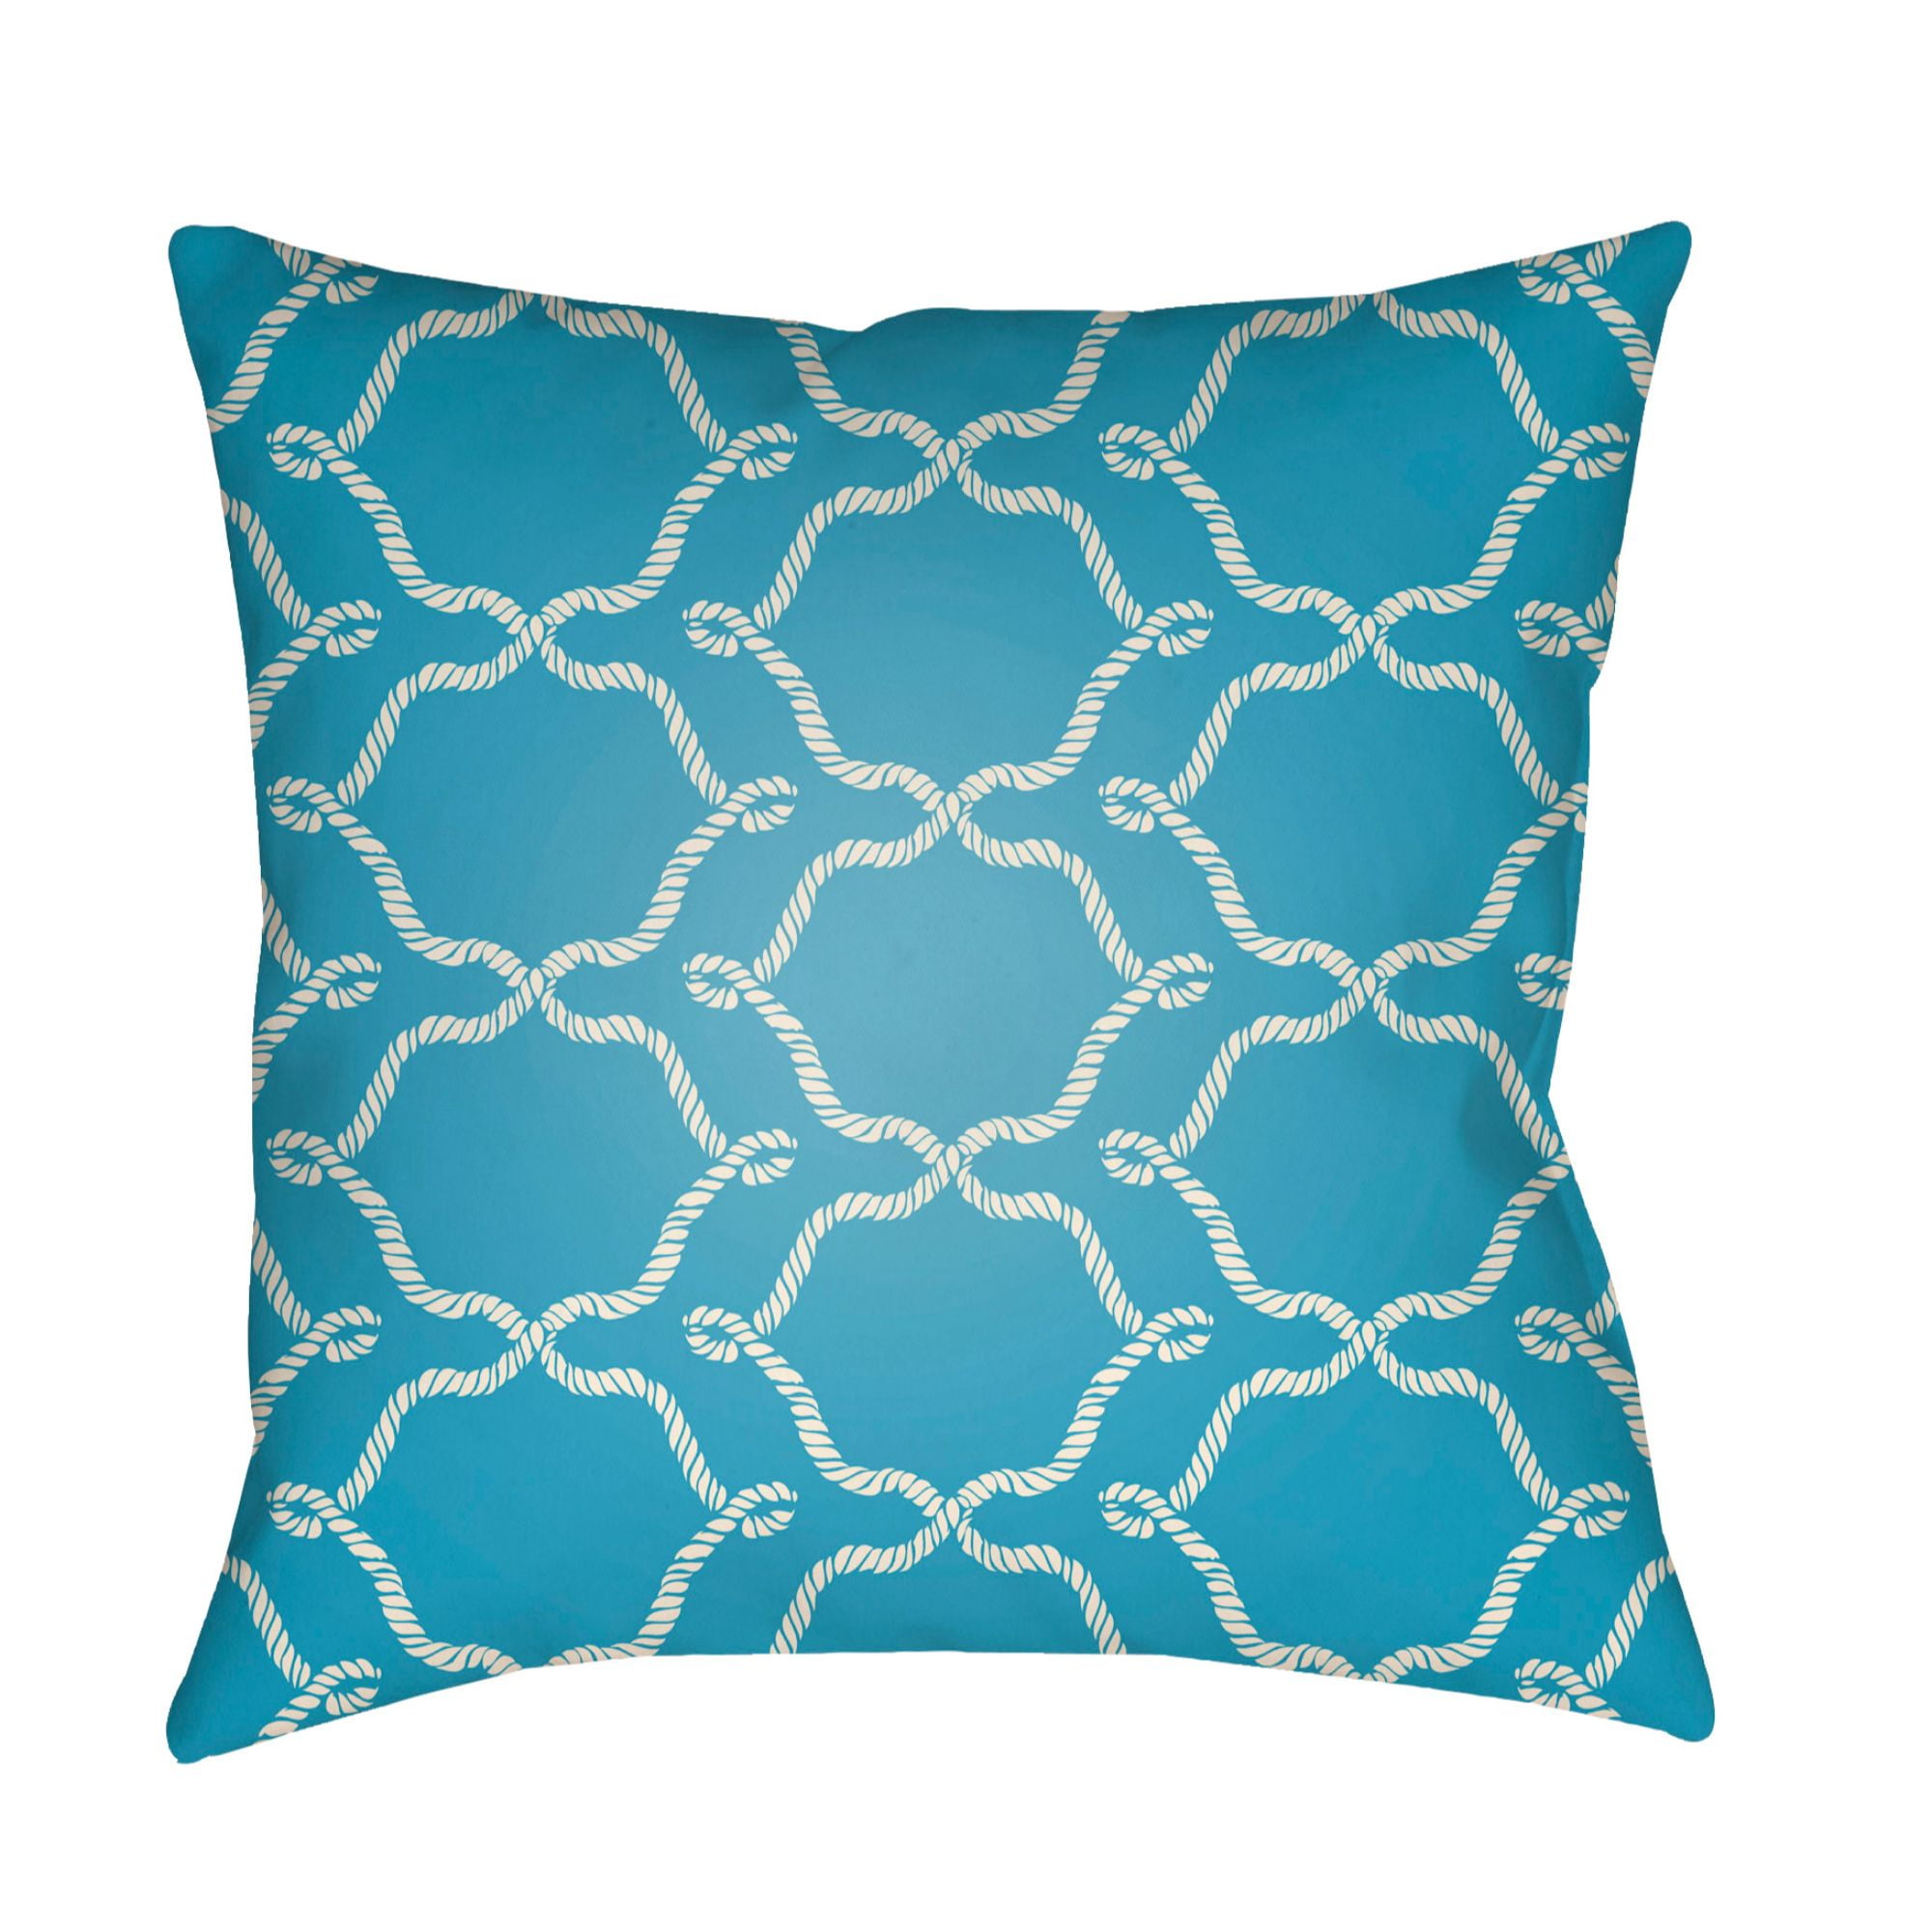 22" Ocean Blue and White Ogee Patterned Square Throw Pillow Cover